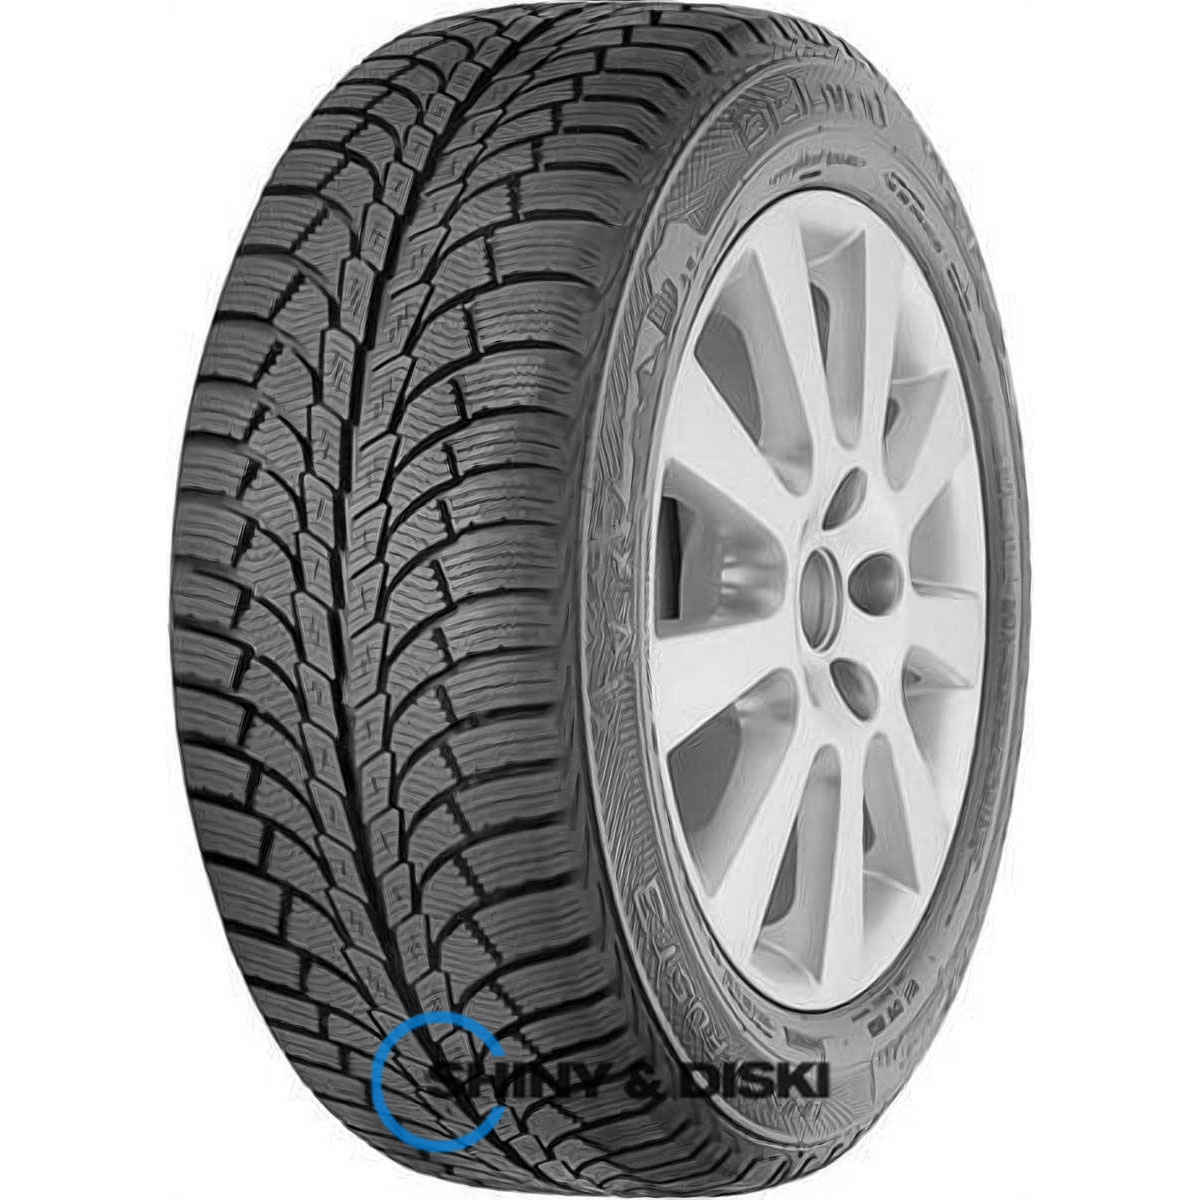 gislaved soft frost 3 205/60 r16 96t